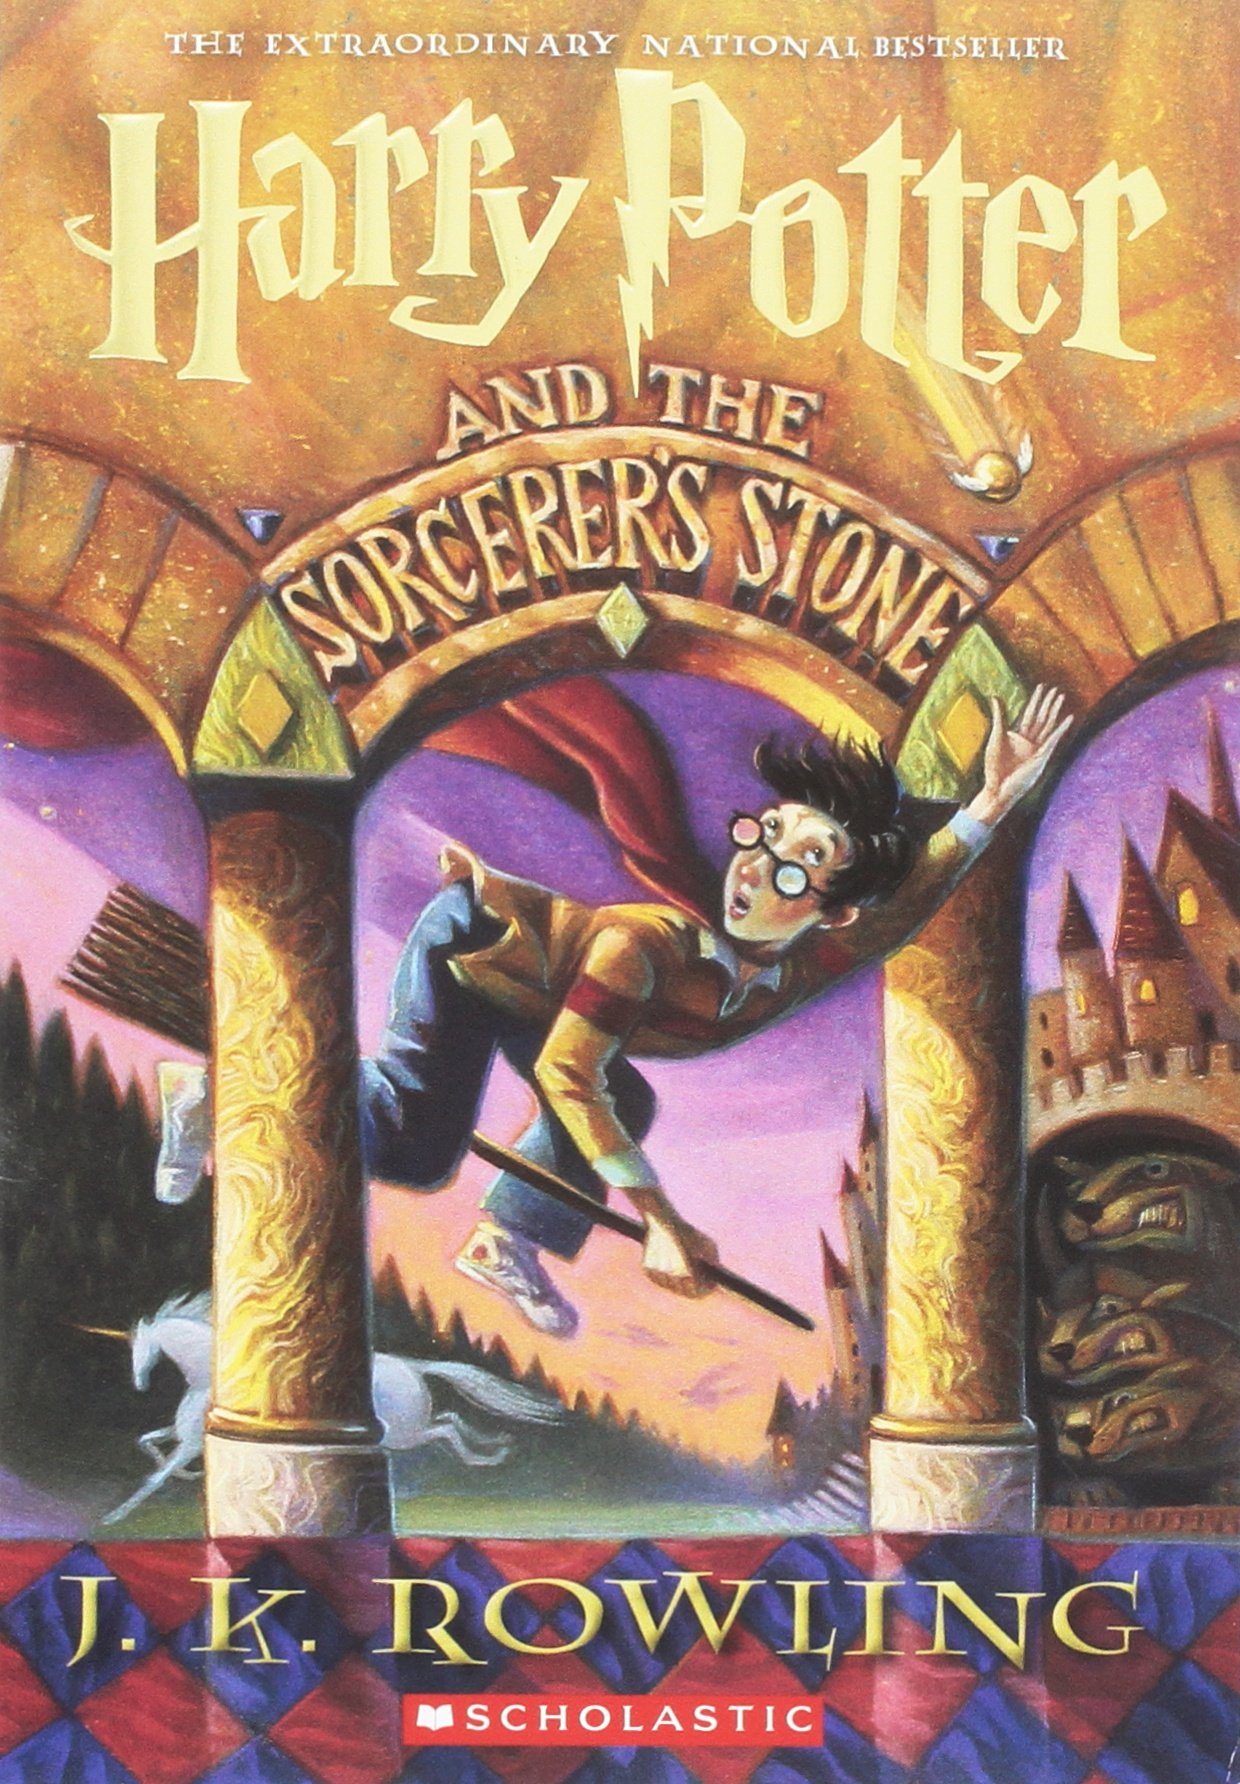 Harry Potter and the Sorcerer’s Stone PDF Free